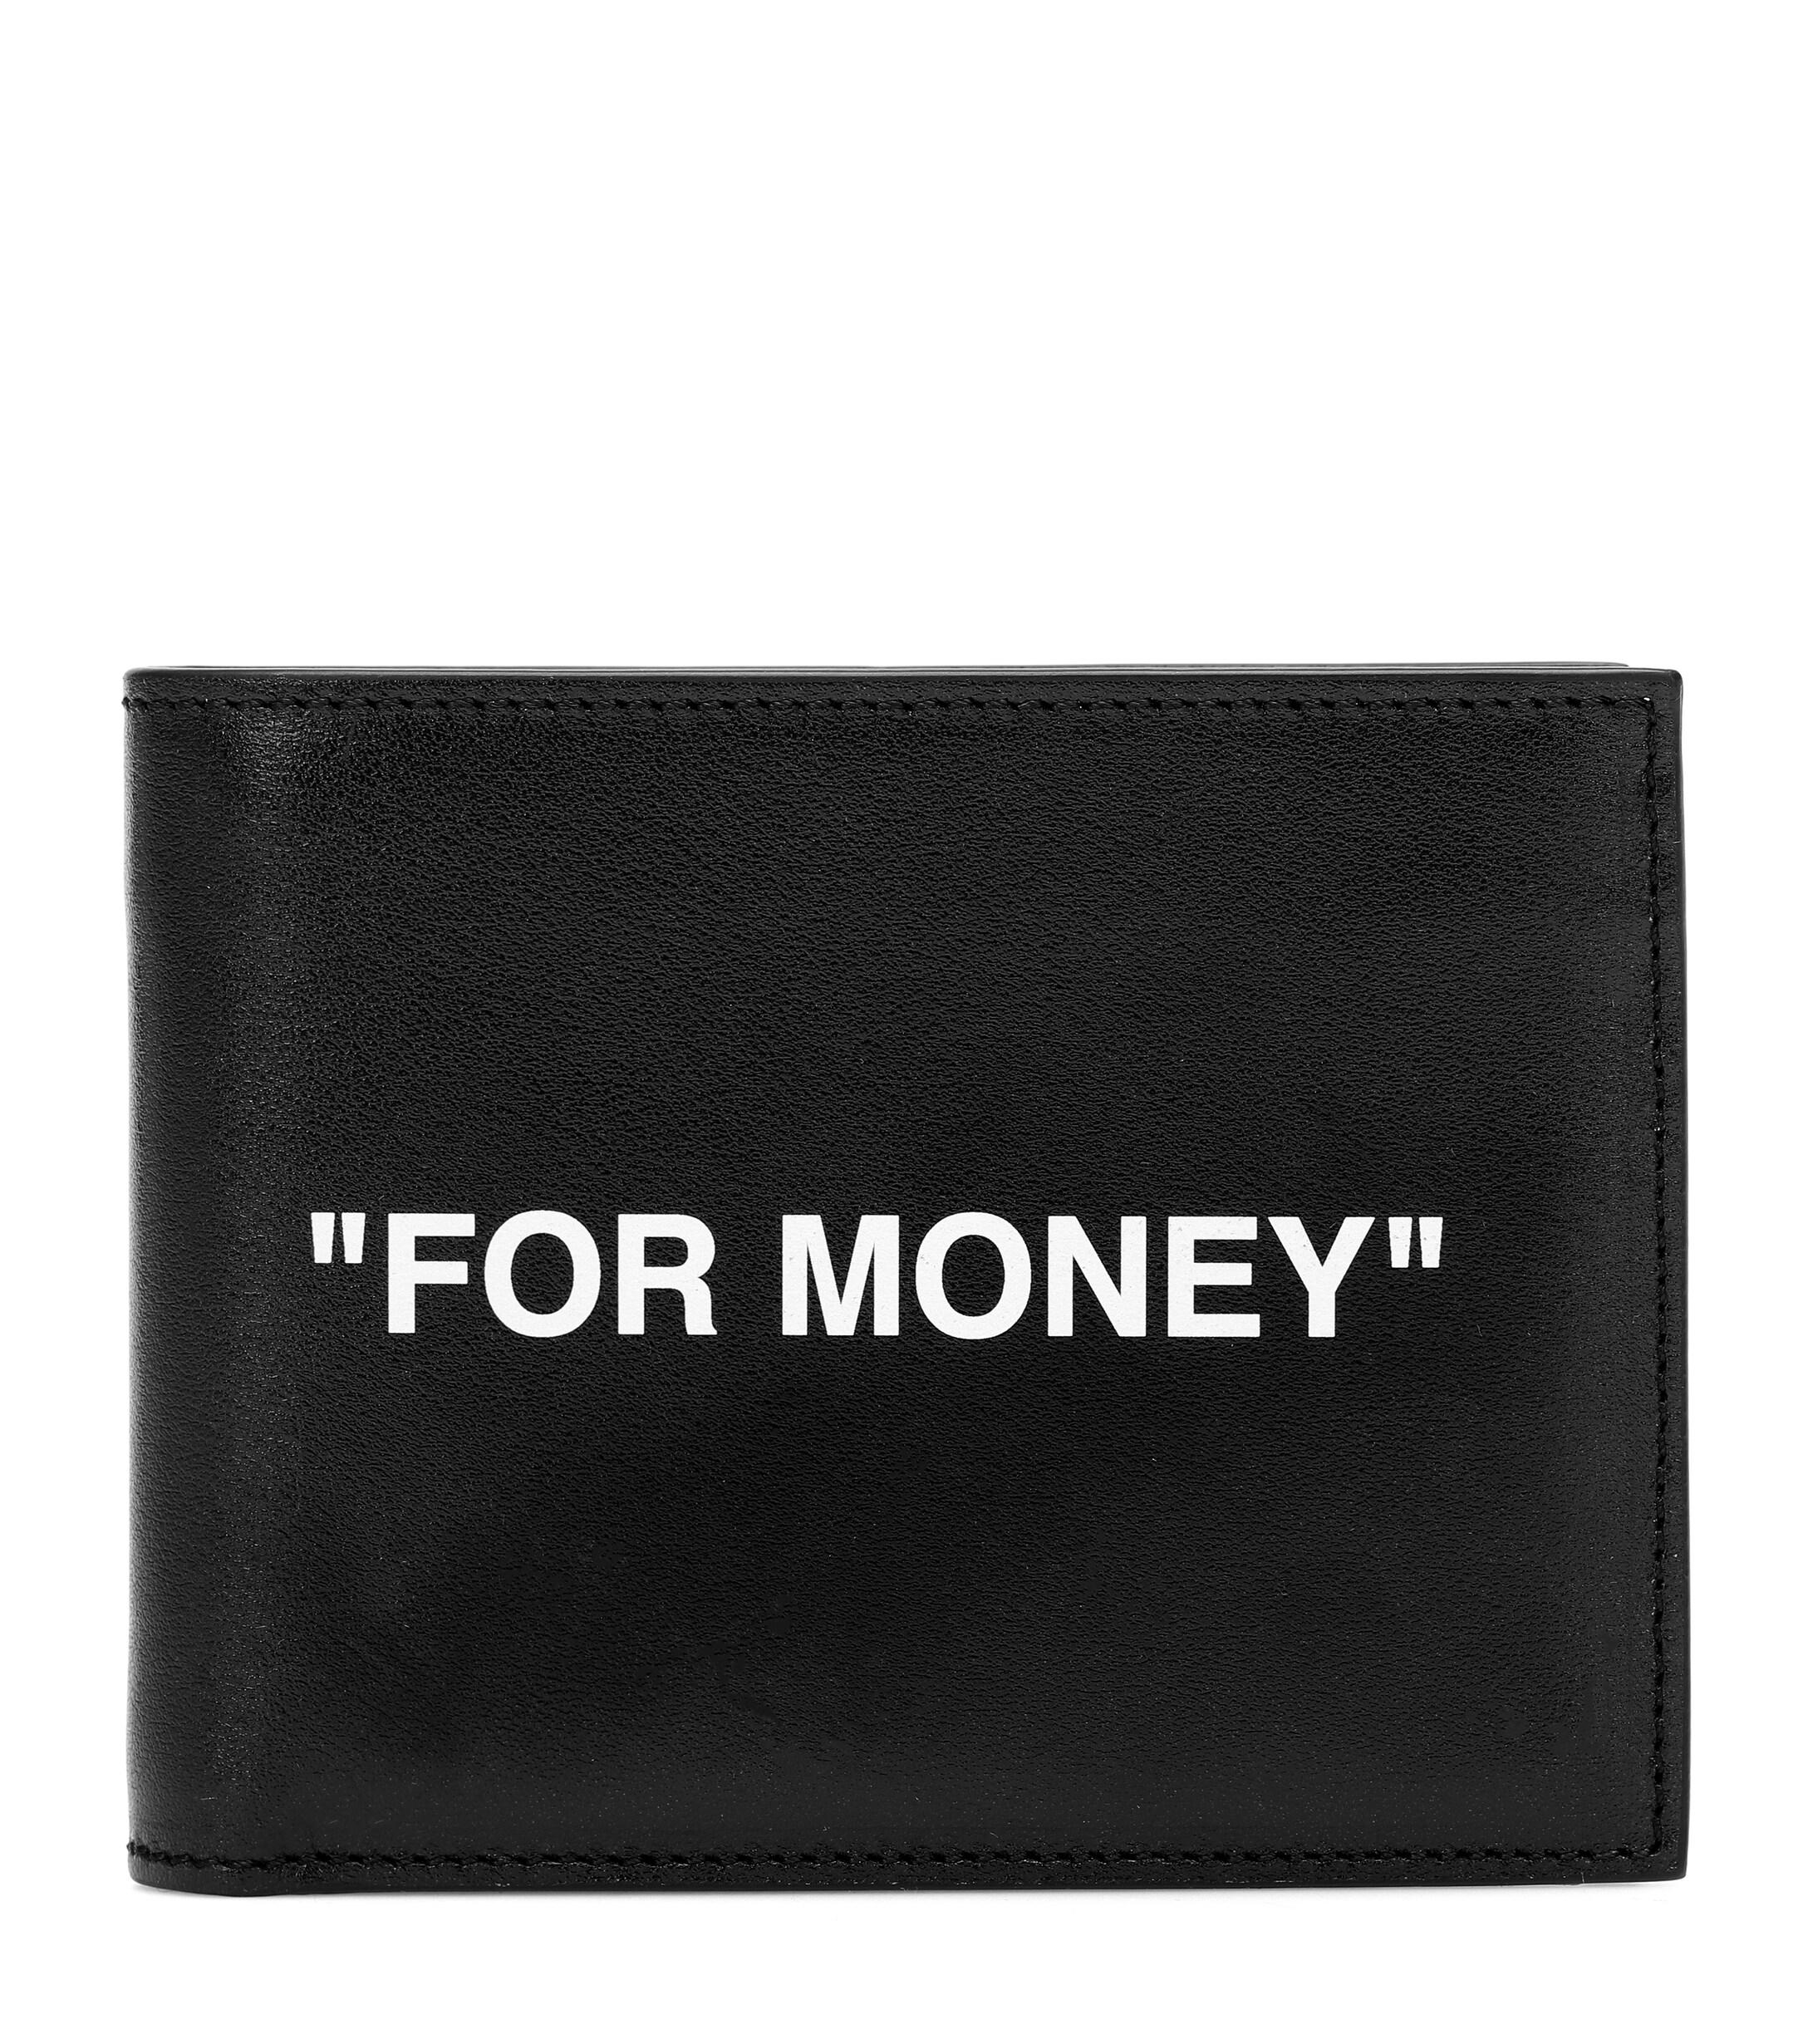 Off-White c/o Virgil Abloh Quote Leather Wallet in Black - Lyst